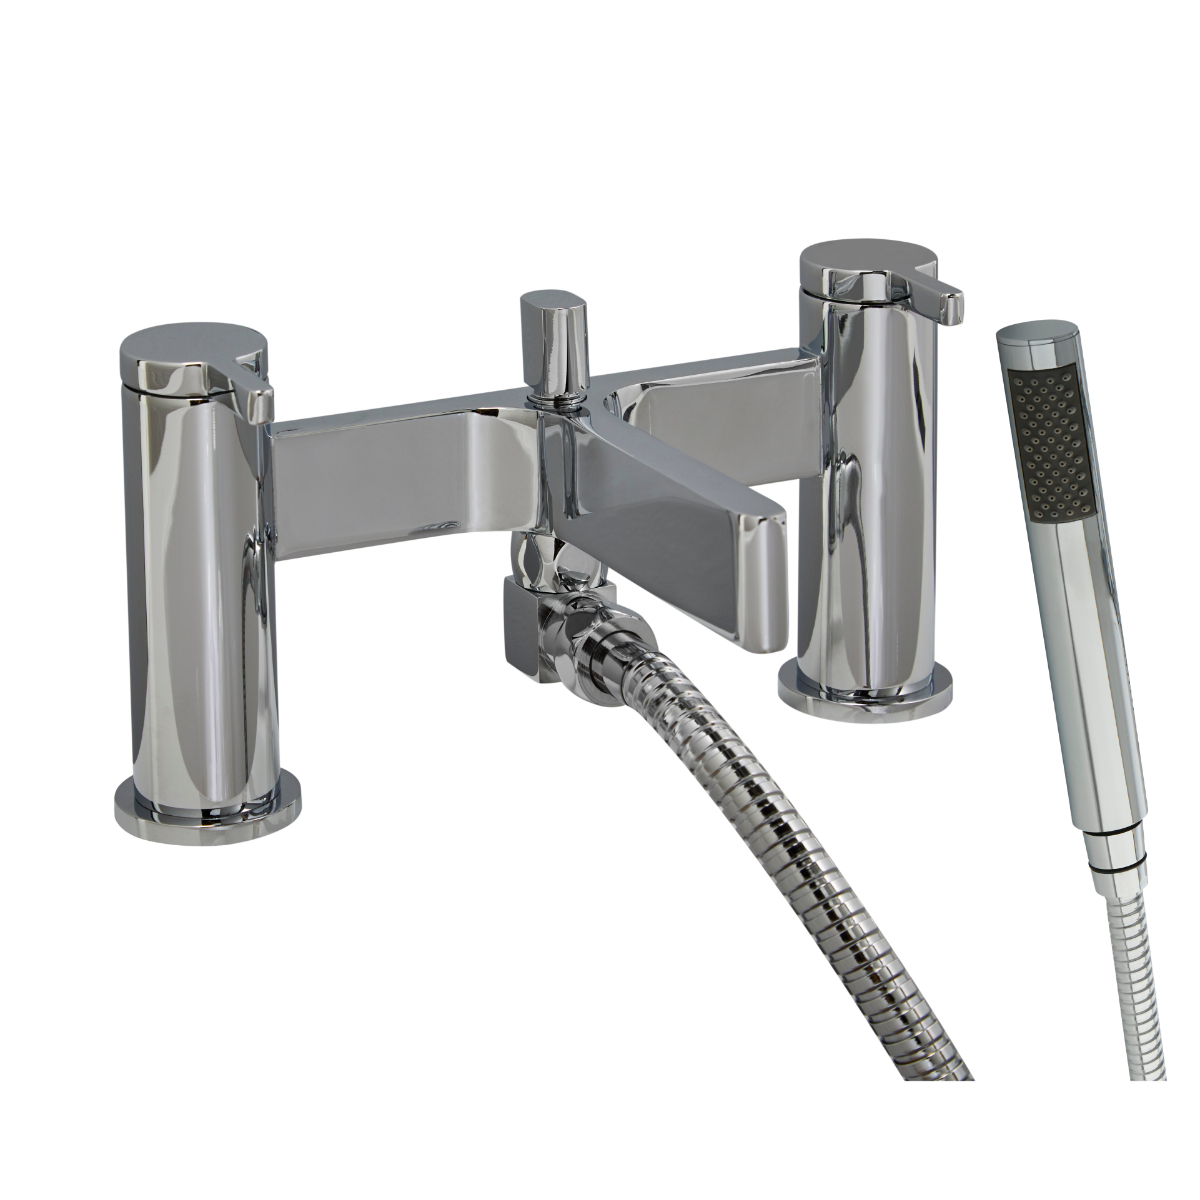 Forres Chrome Bath Shower Mixer Tap And Shower Kit